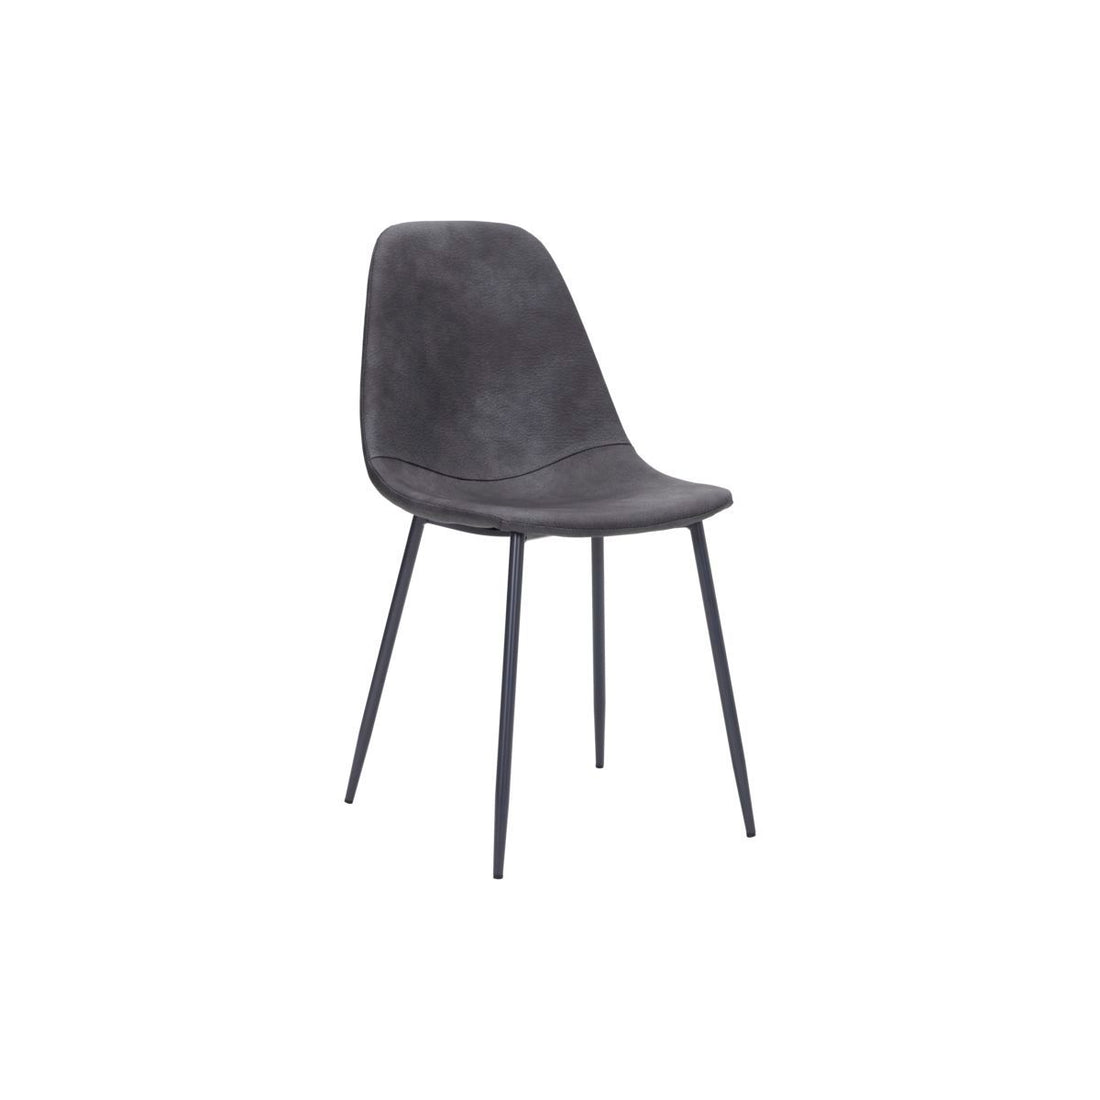 House Doctor Chair, Found, Antik Gray